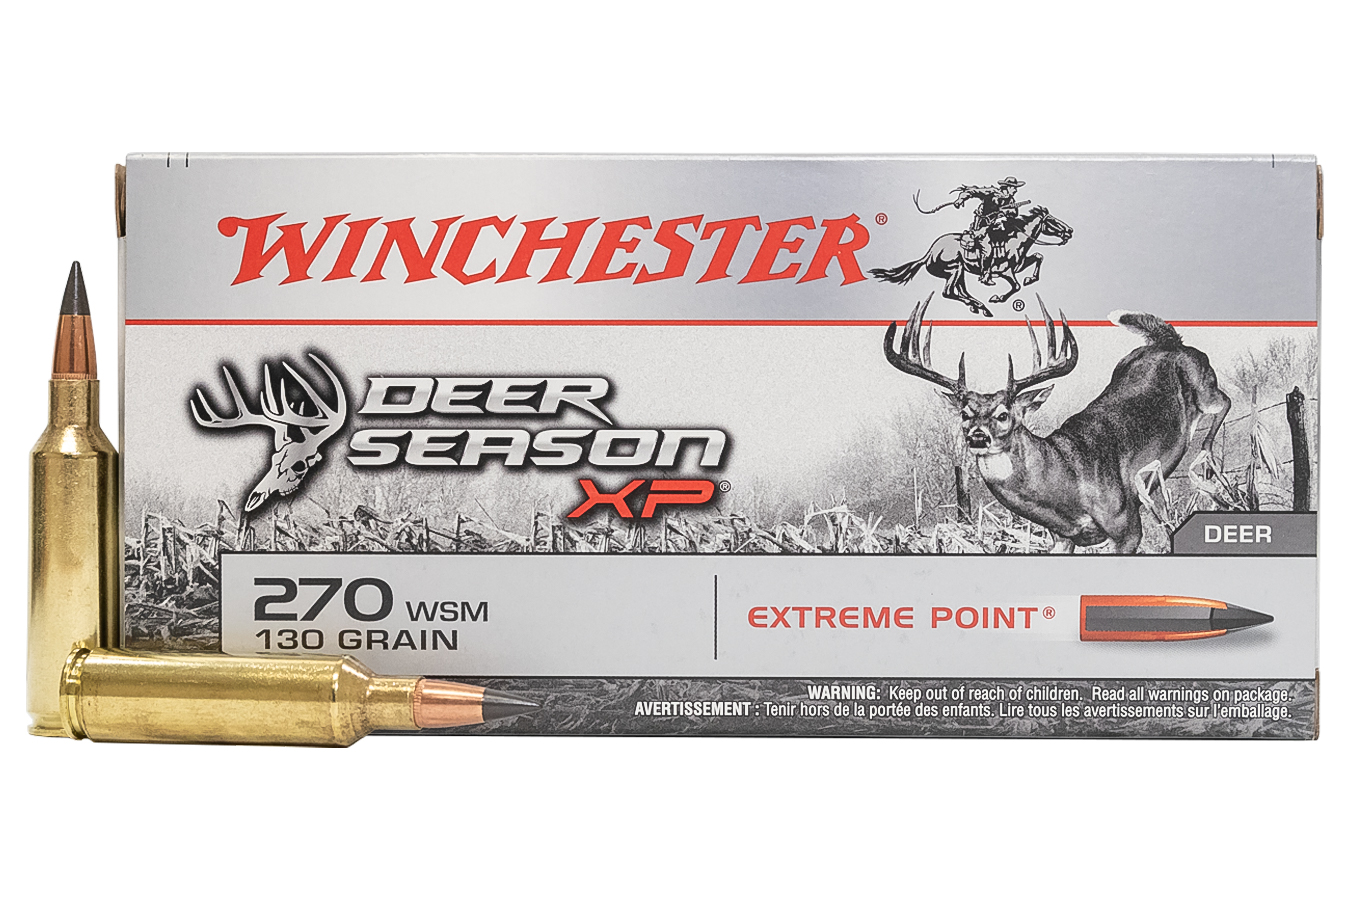 WINCHESTER AMMO 270 WSM 130 GR EXTREME POINT POLYMER TIP DEER SEASON XP